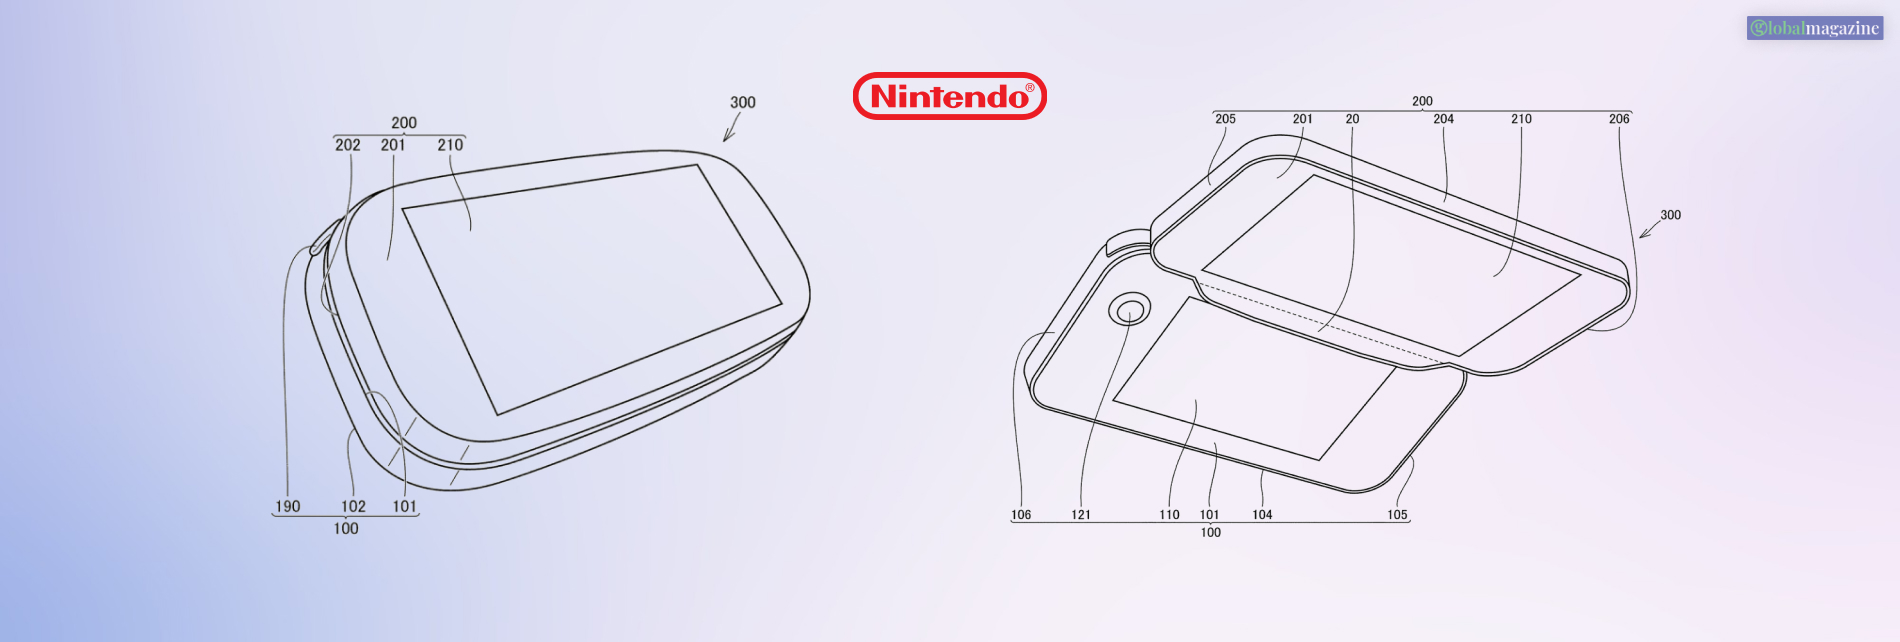 Nintendo's Innovative Dual-Screen Device Patent Fuels Speculation About The Future